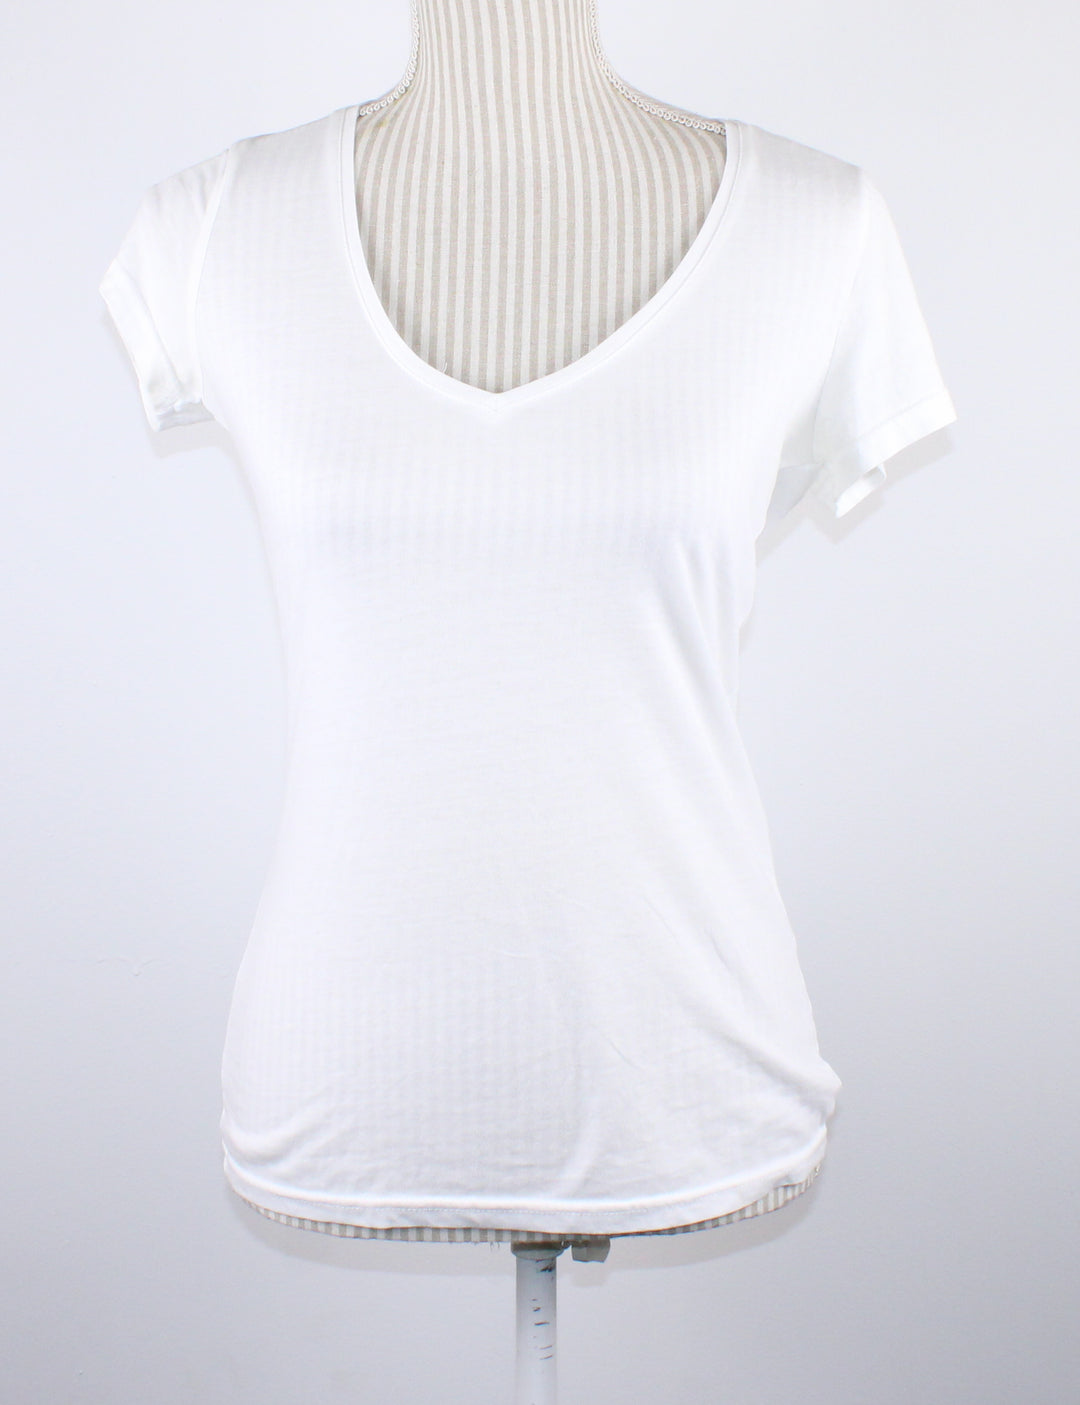 GEORGE WHITE VNECK FITTED TEE LADIES SMALL EUC